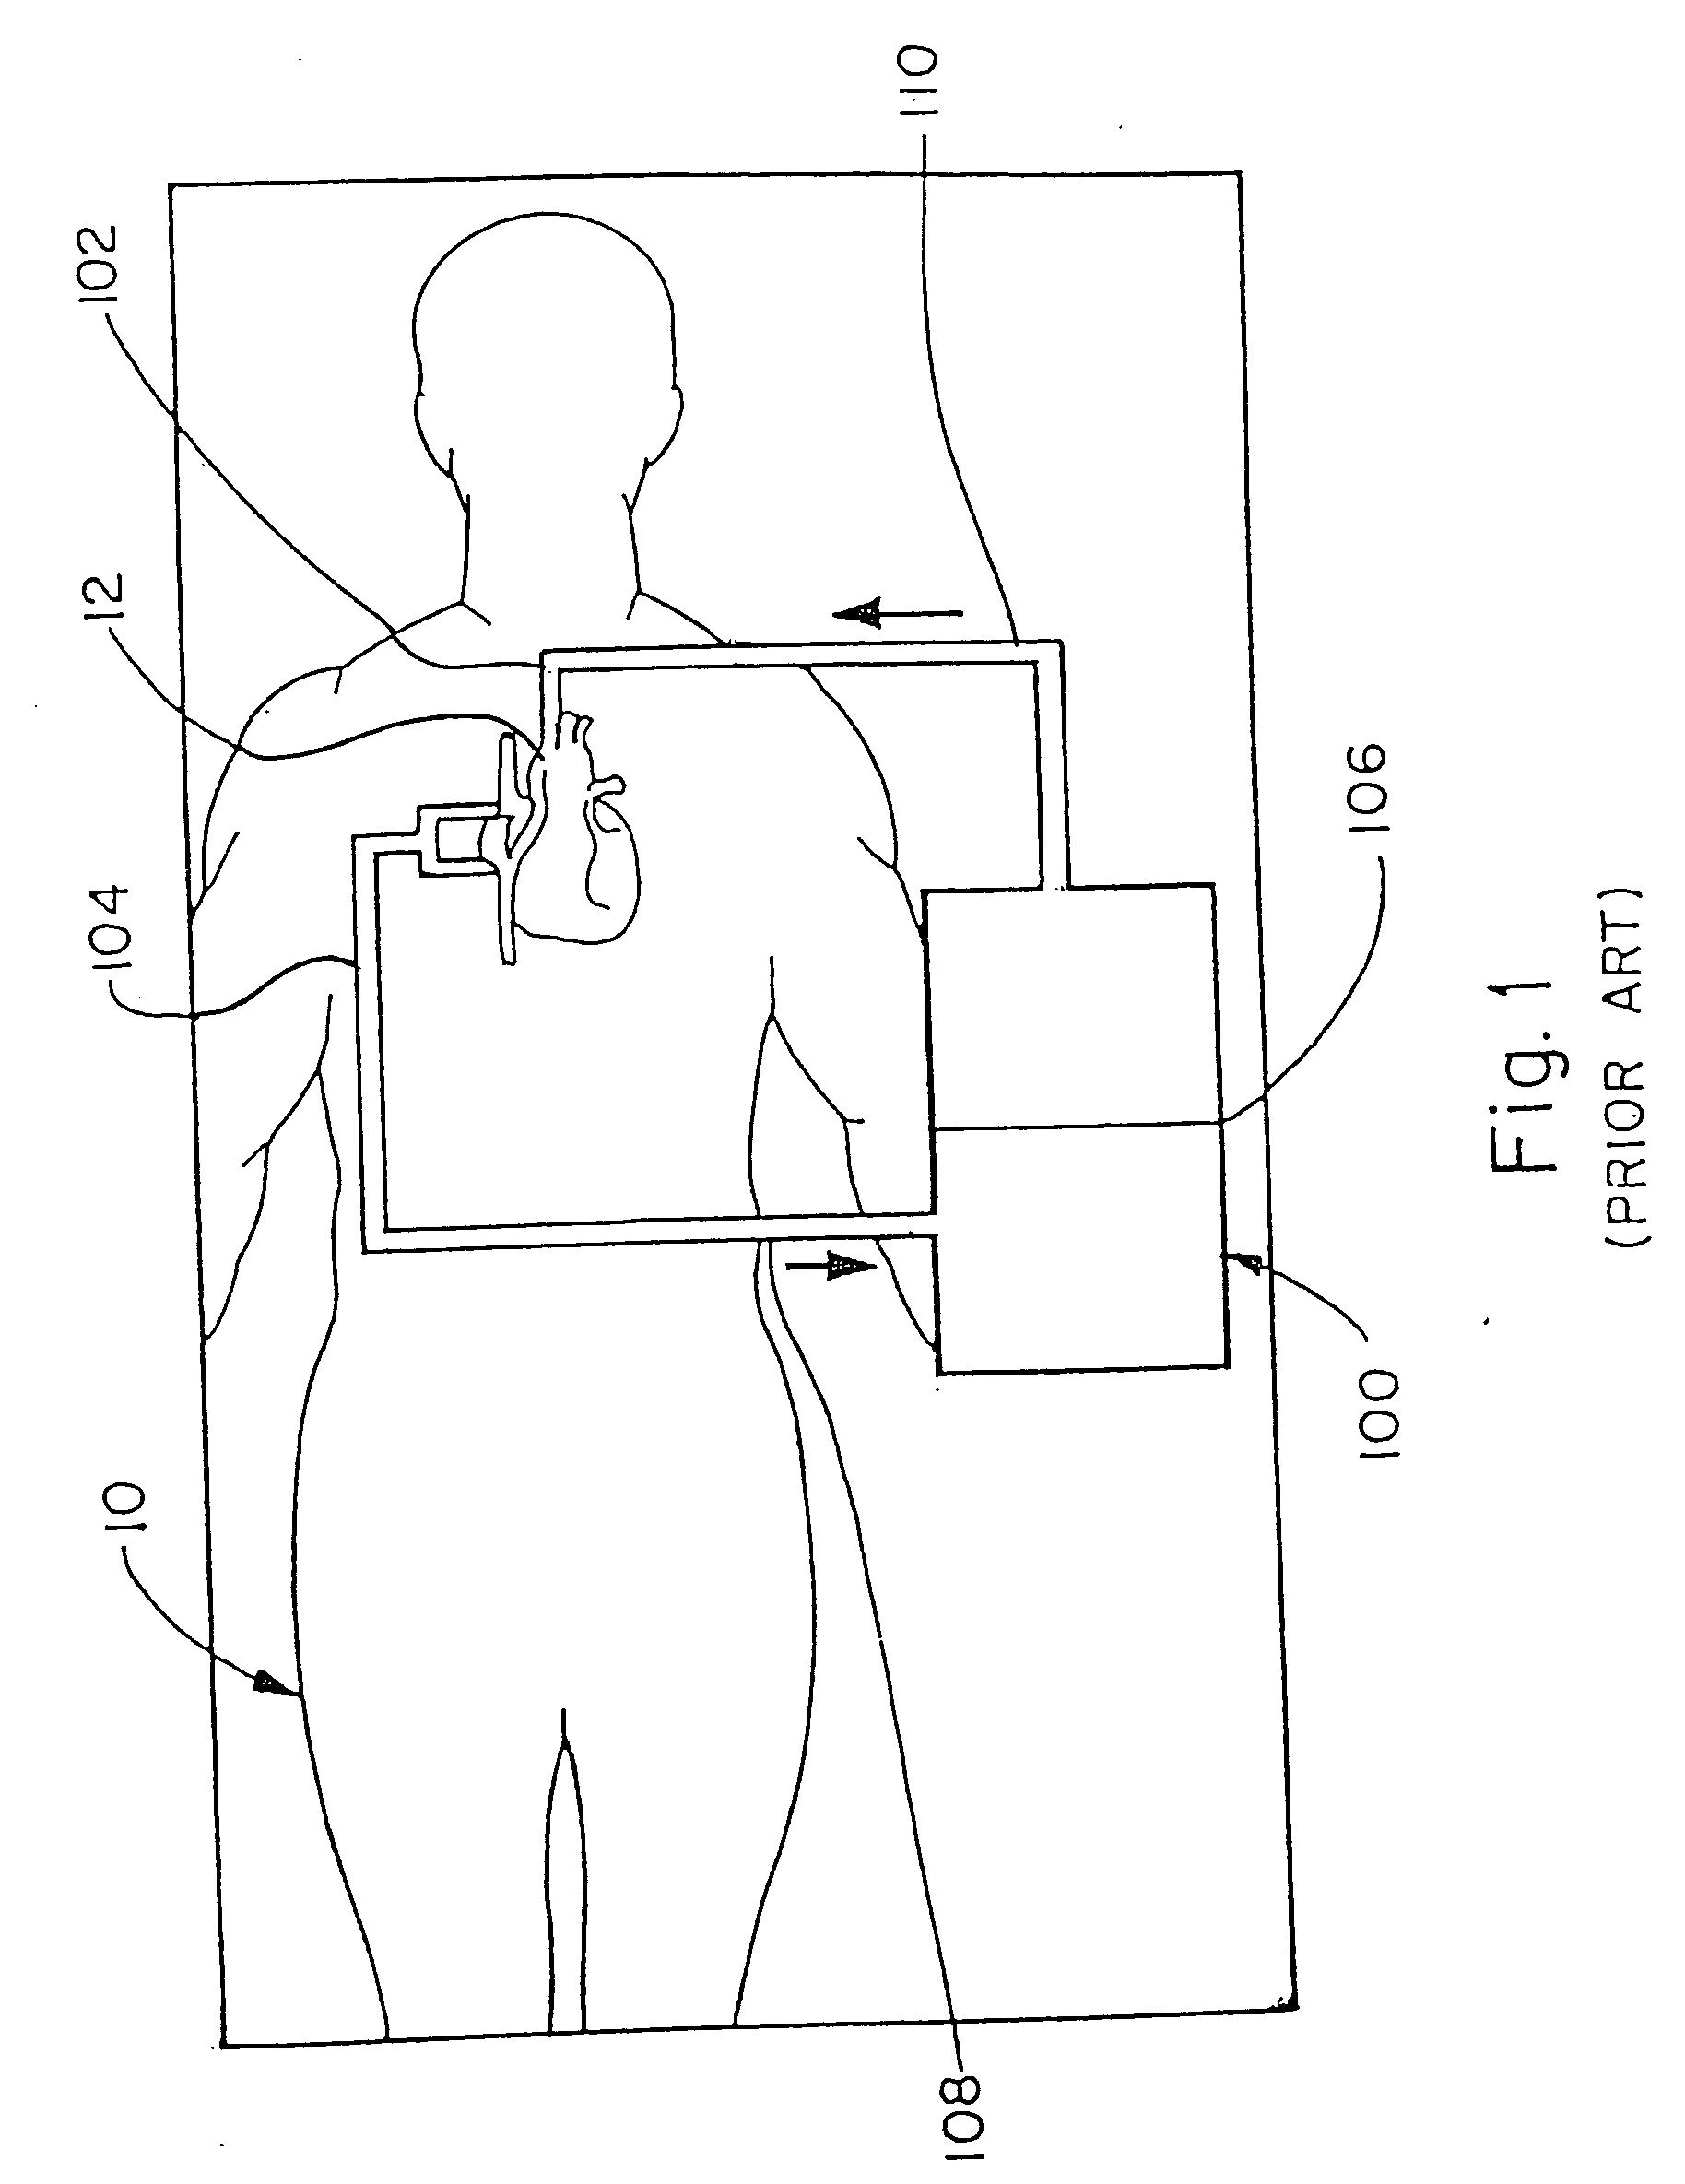 Method of recovering blood from an extracorporeal circuit